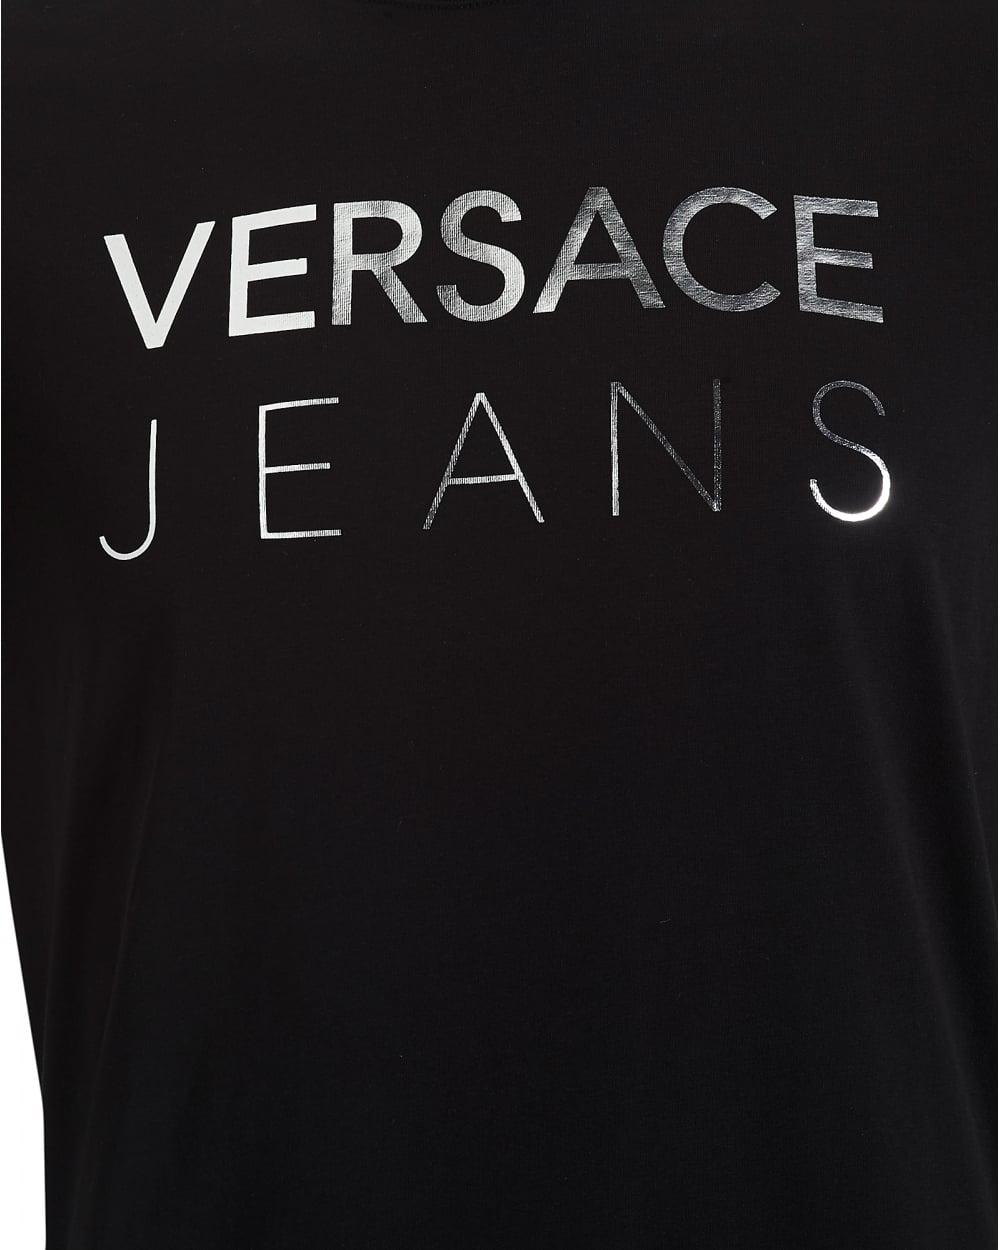 Black and Silver Logo - Versace Jeans Mens Black T Shirt, Slim Fit Silver Logo Text Tee